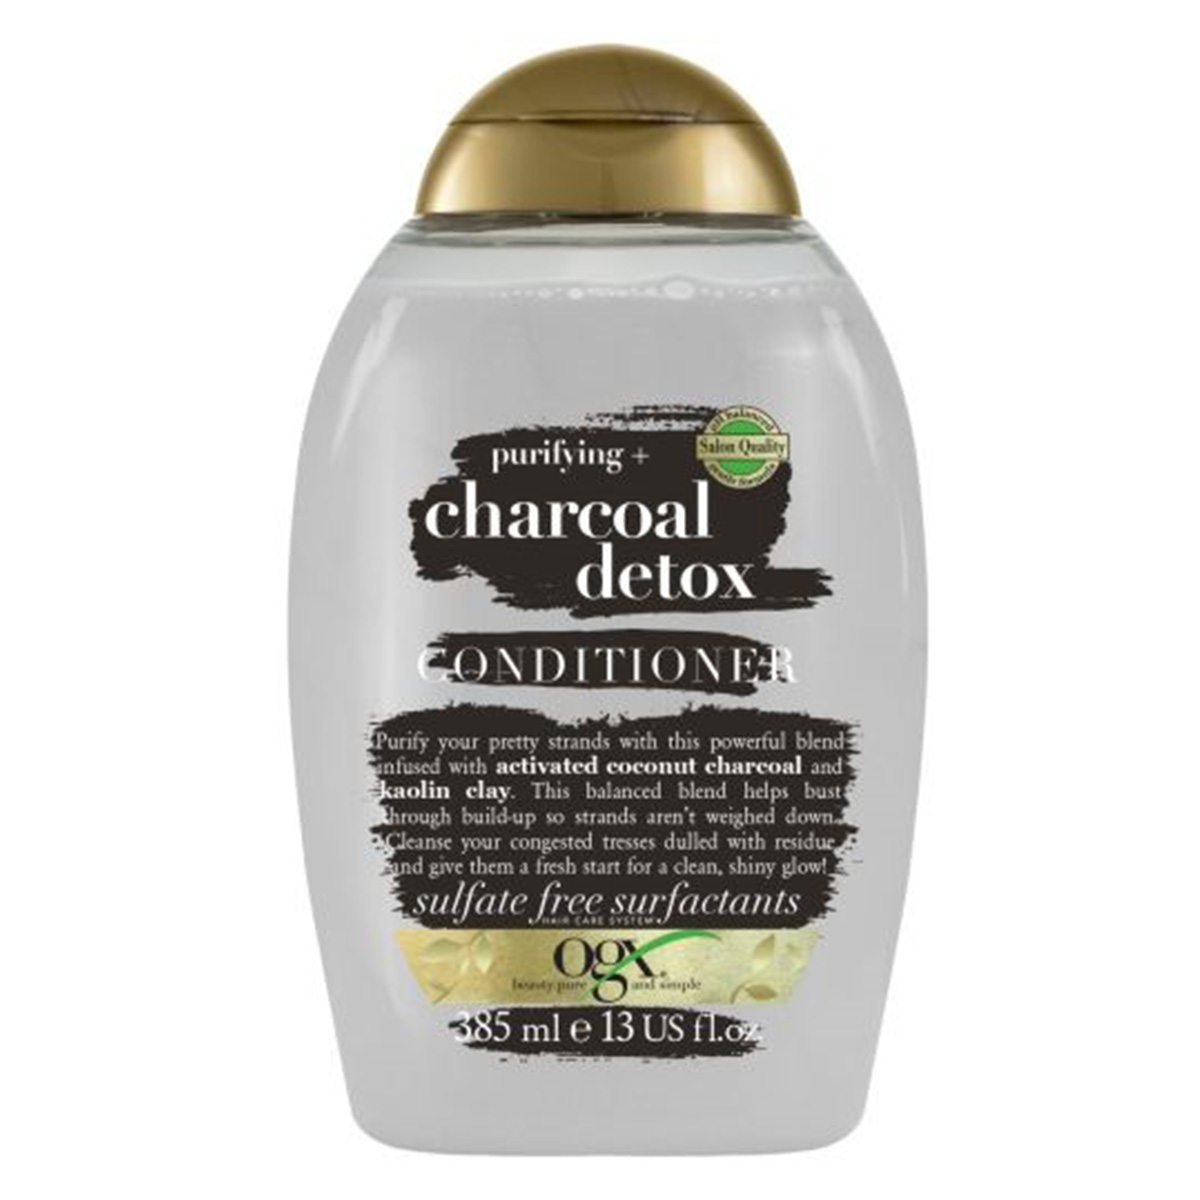 OGX Purifying Charcoal Detox Conditioner, 385ml